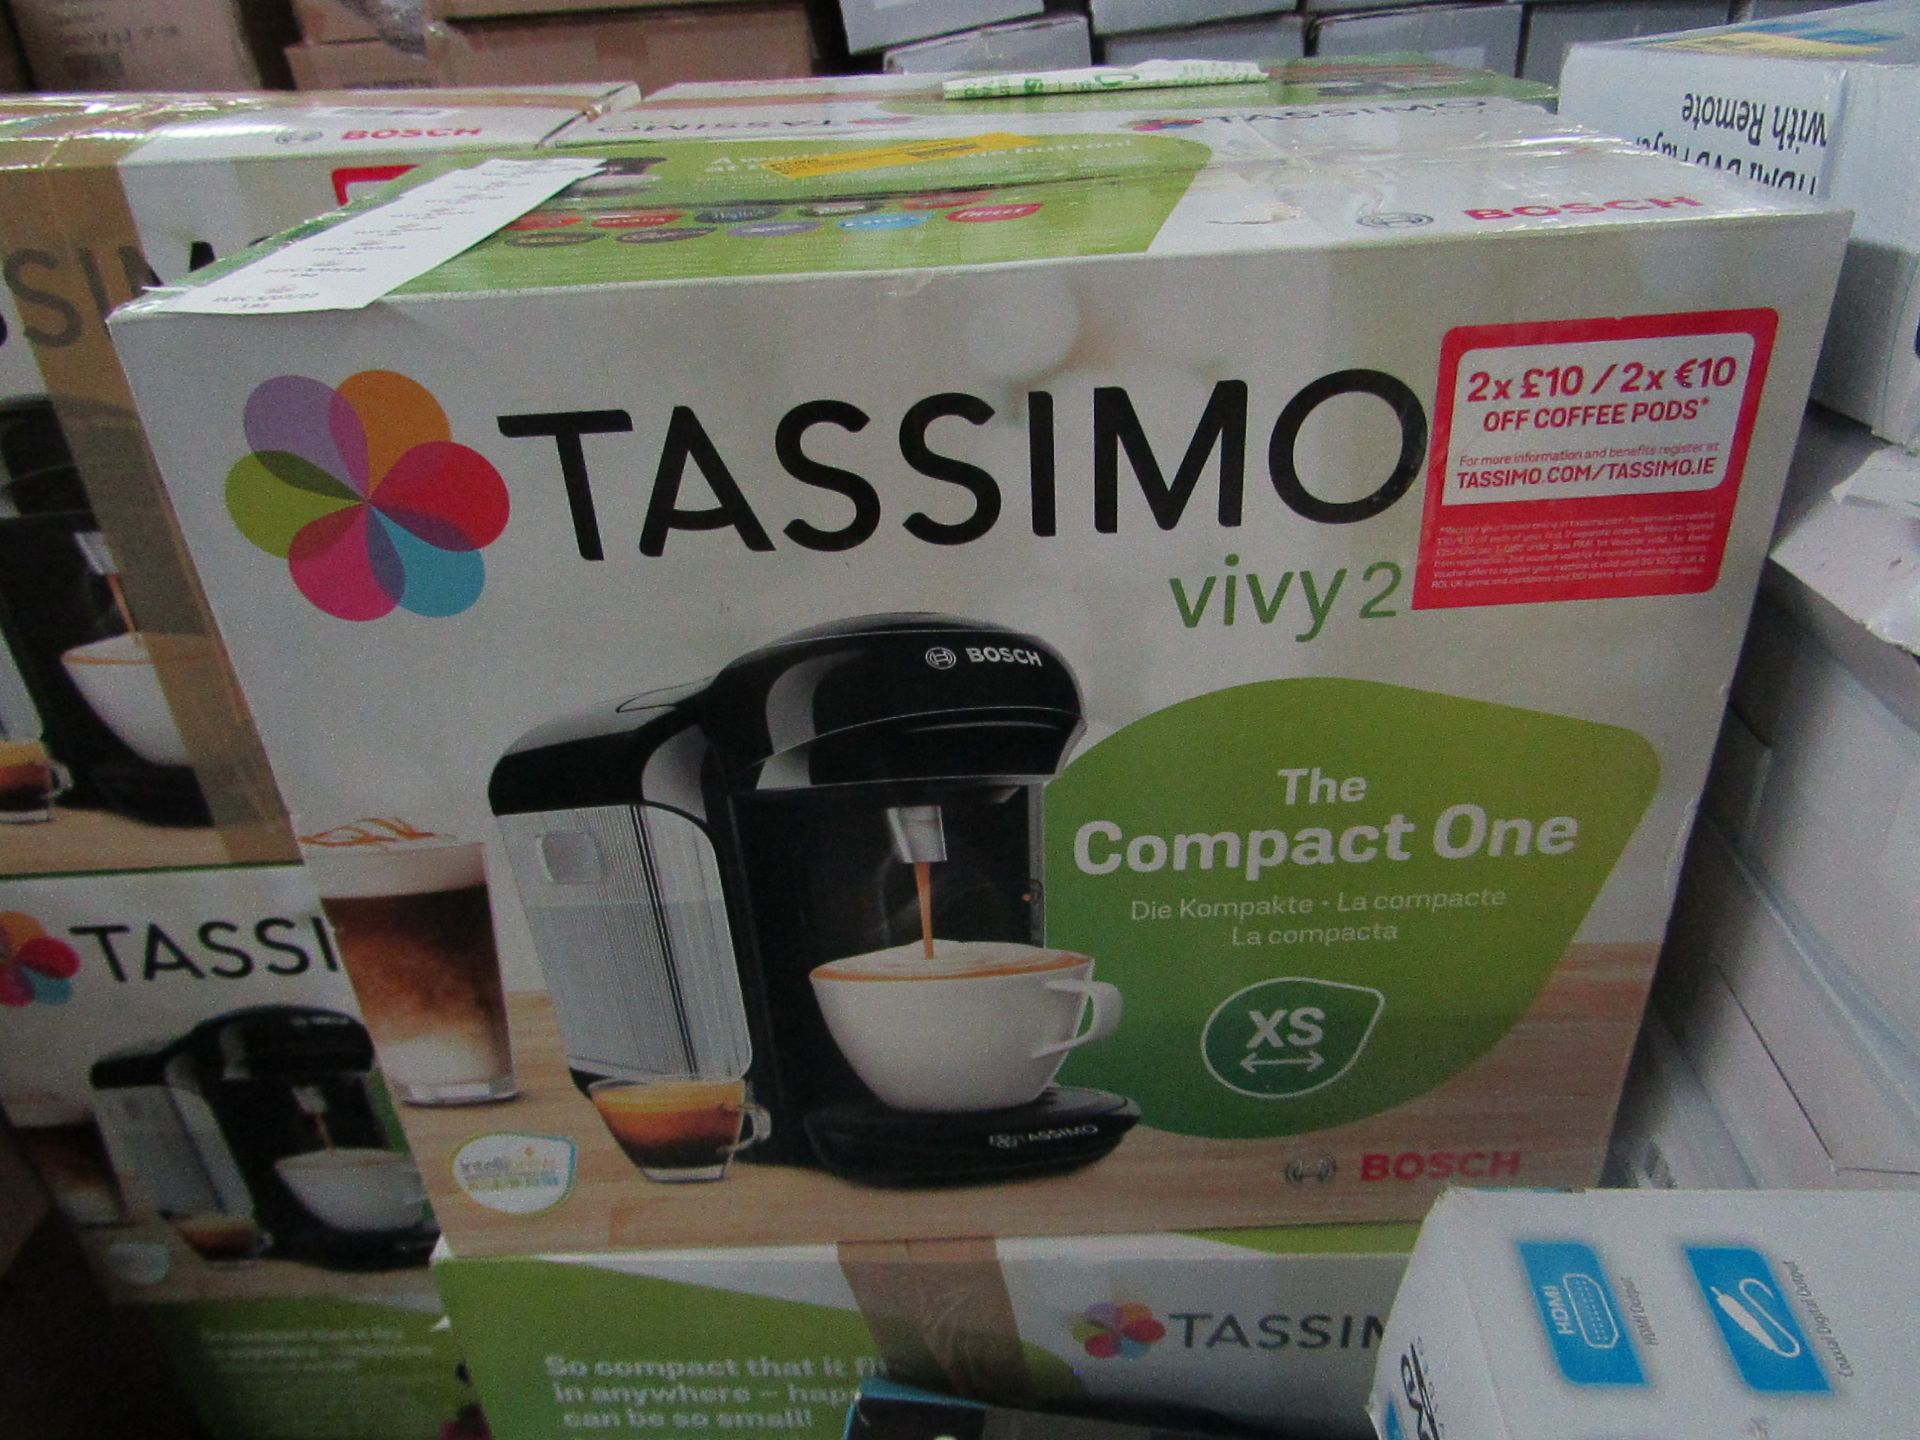 | 1X | TASSIMO VIVY 2 COMPACT COFFEE POD MACHINE | UNCHECKED RETURN | ITEMS ARE COMPLETELY UNCHECKED